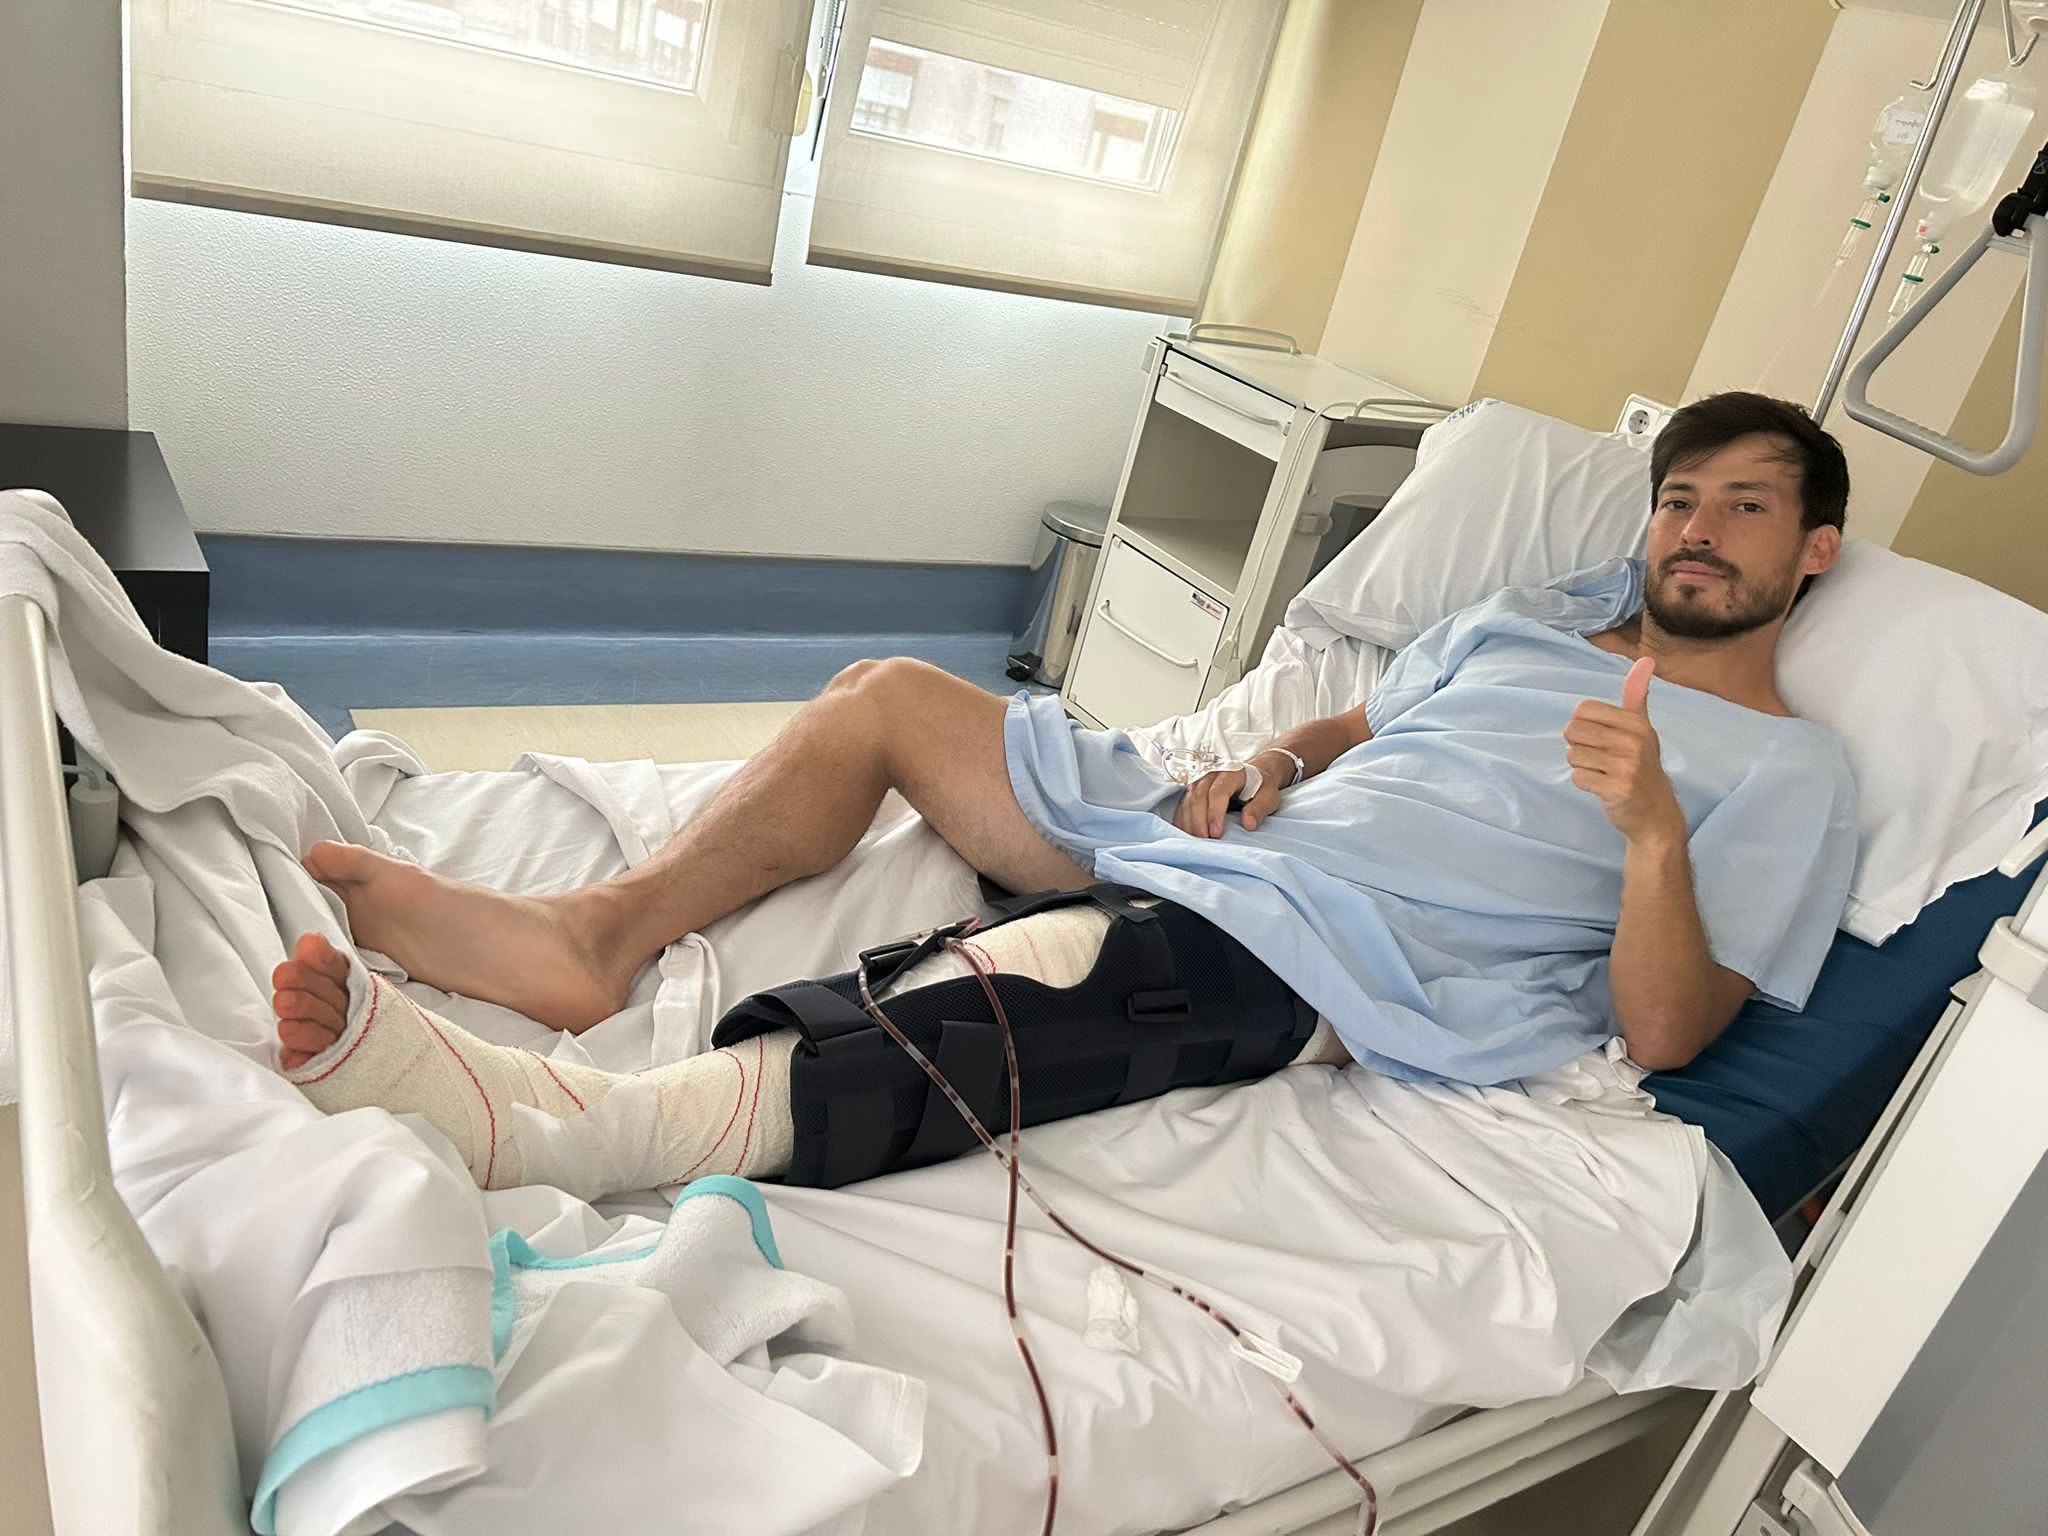 David Silva undergoes surgery on injury which forced his premature retirement from professional football